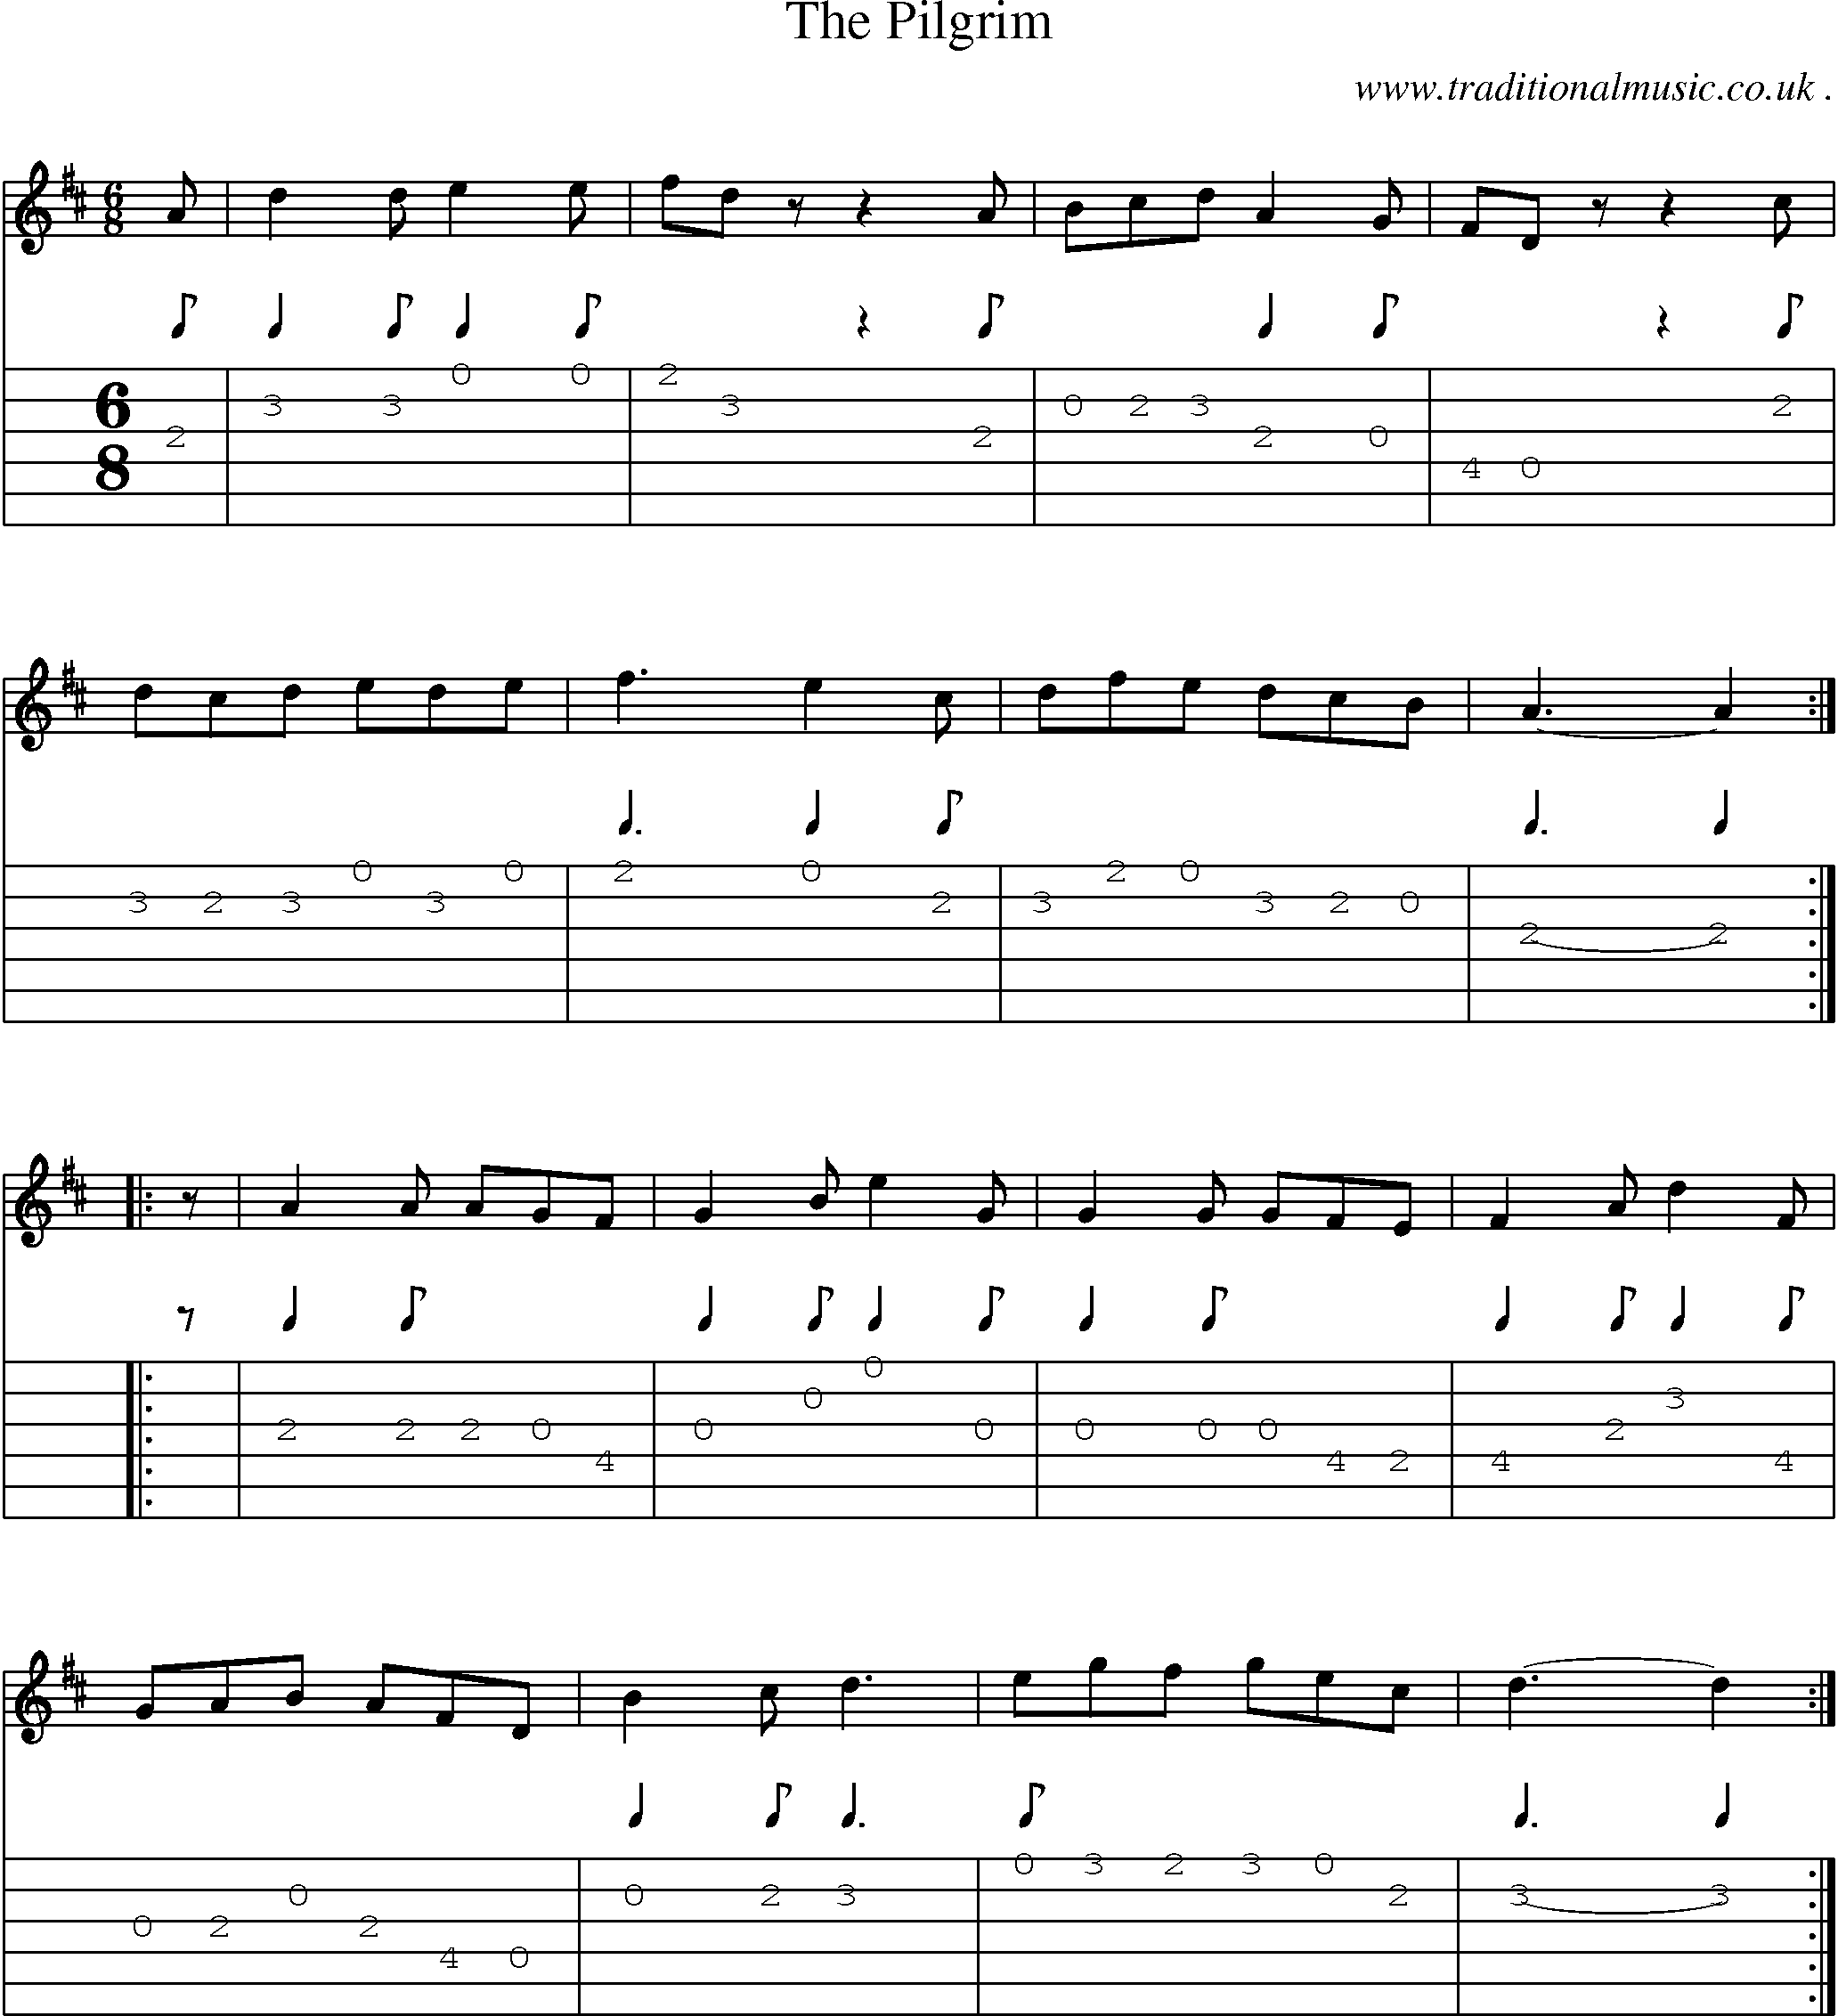 Sheet-Music and Guitar Tabs for The Pilgrim